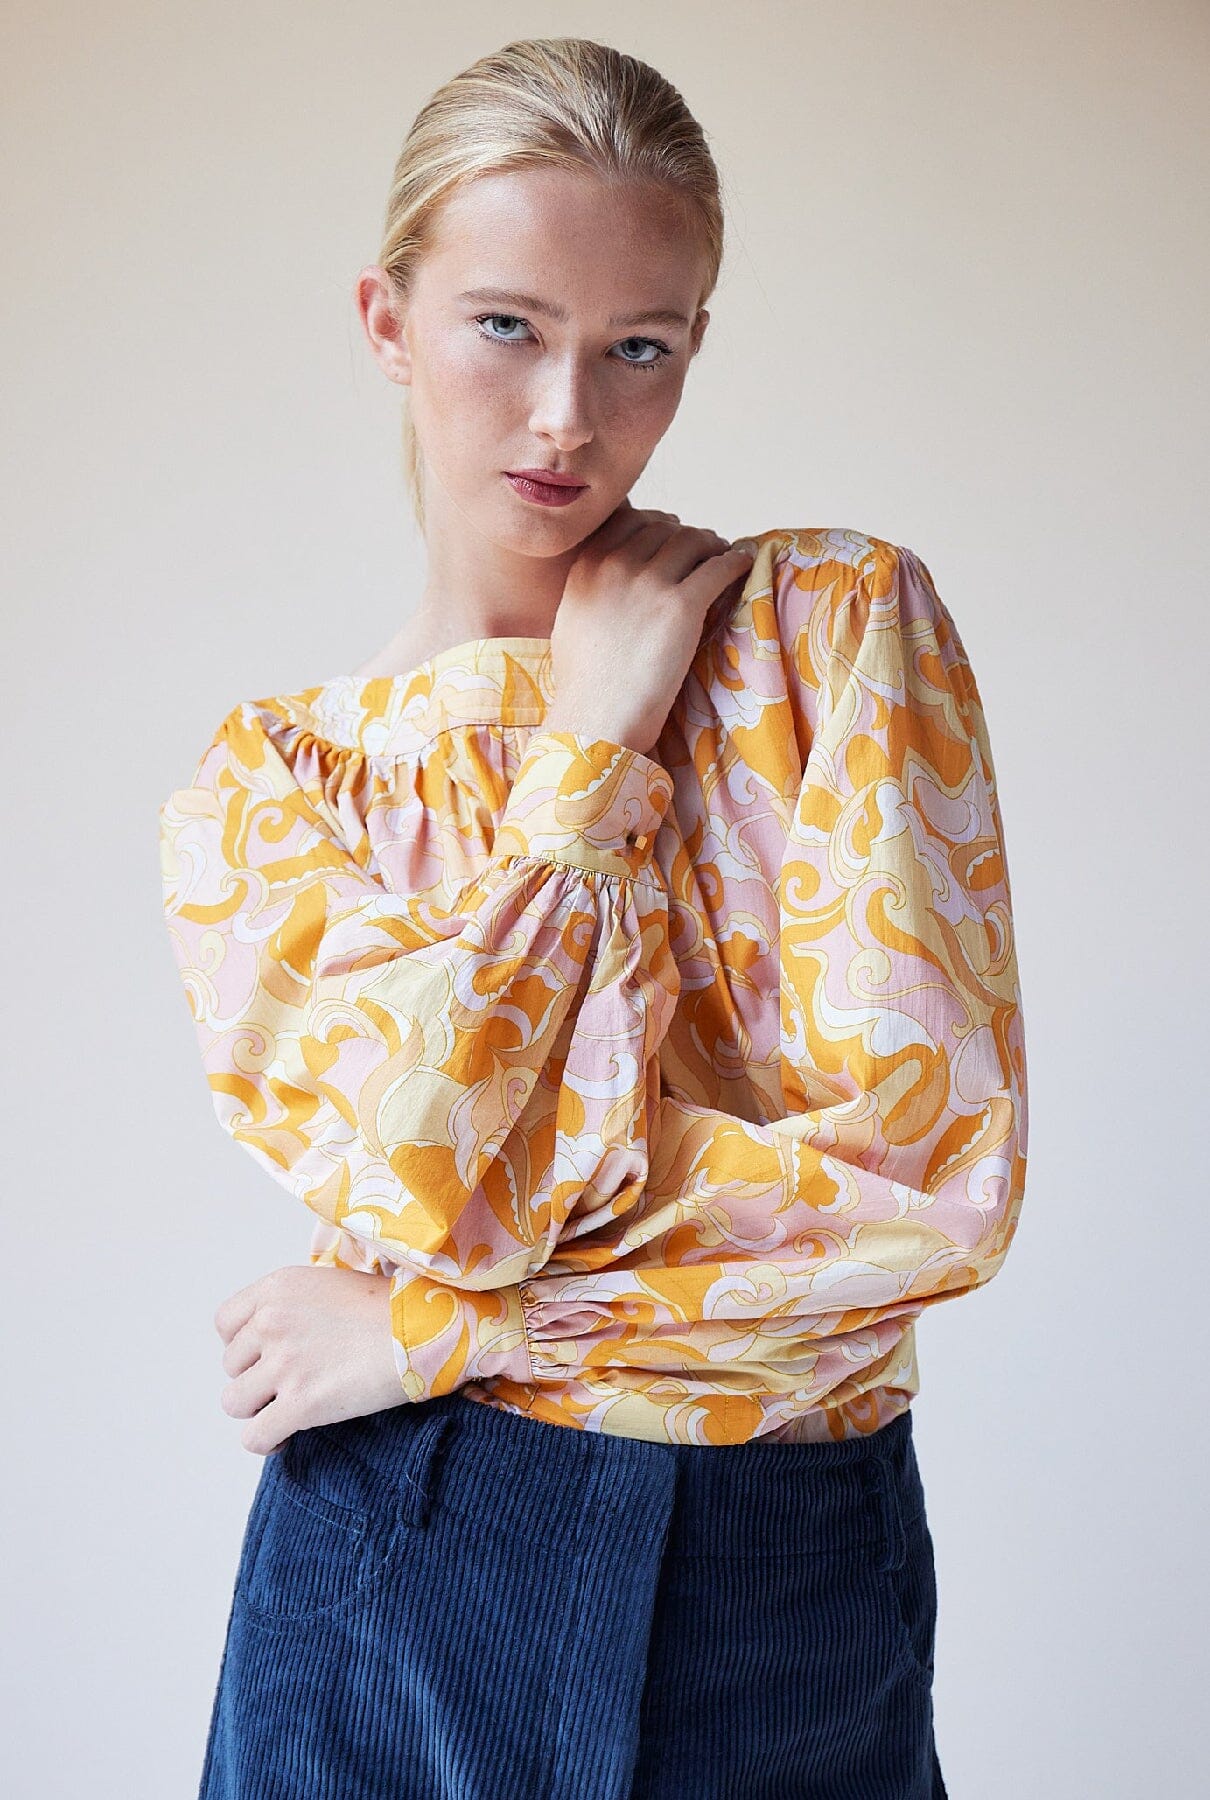 Didi Top Apricot Shirts & blouses The Label Edition 